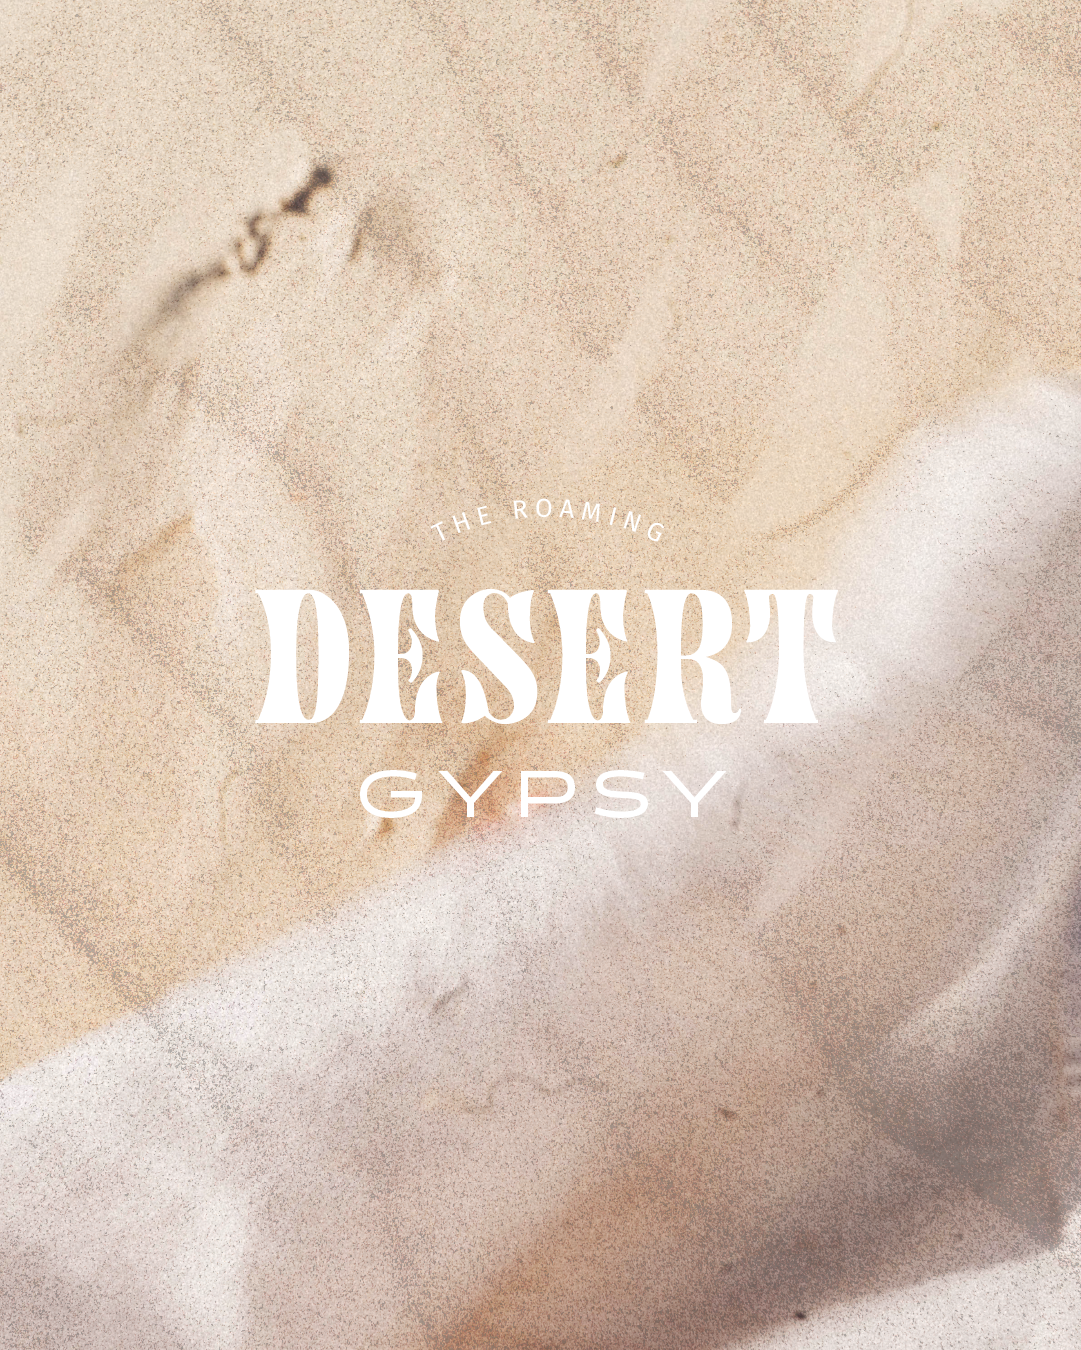 IG_The Roaming Desert Gypsy CoverArtboard 1.png